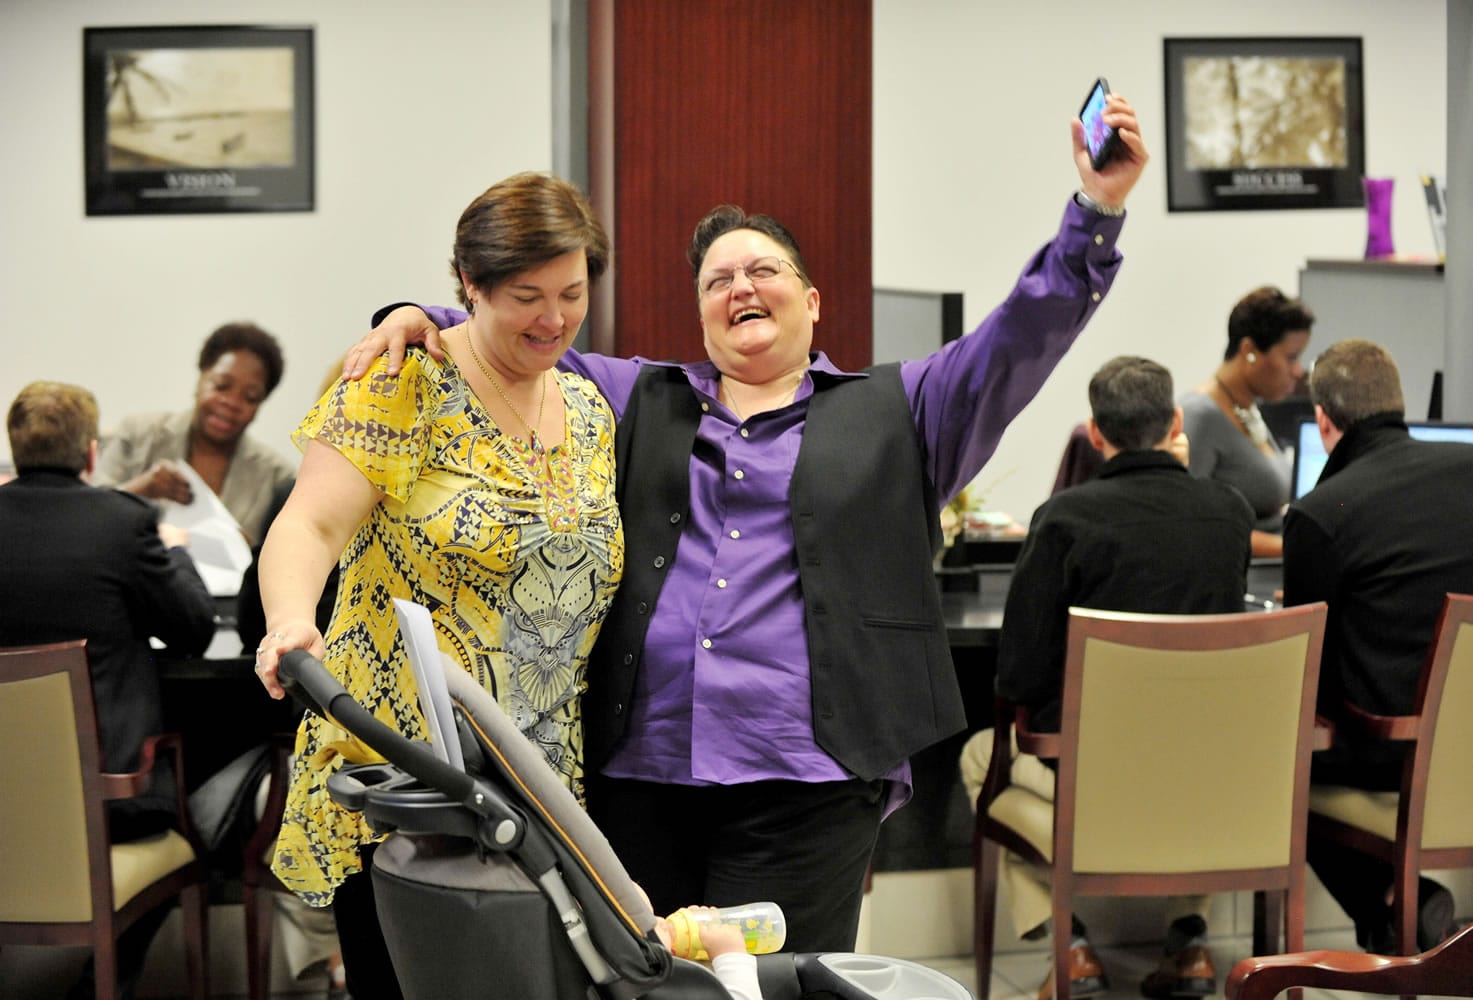 BOB SELF/Associated Press
Tami Voisard, right, celebrates with her fianc?e, Tara Day, after the couple were one of the first wave of same-sex couples to receive their marriage license Tuesday morning in the Duval County Courthouse in Jacksonville, Fla.